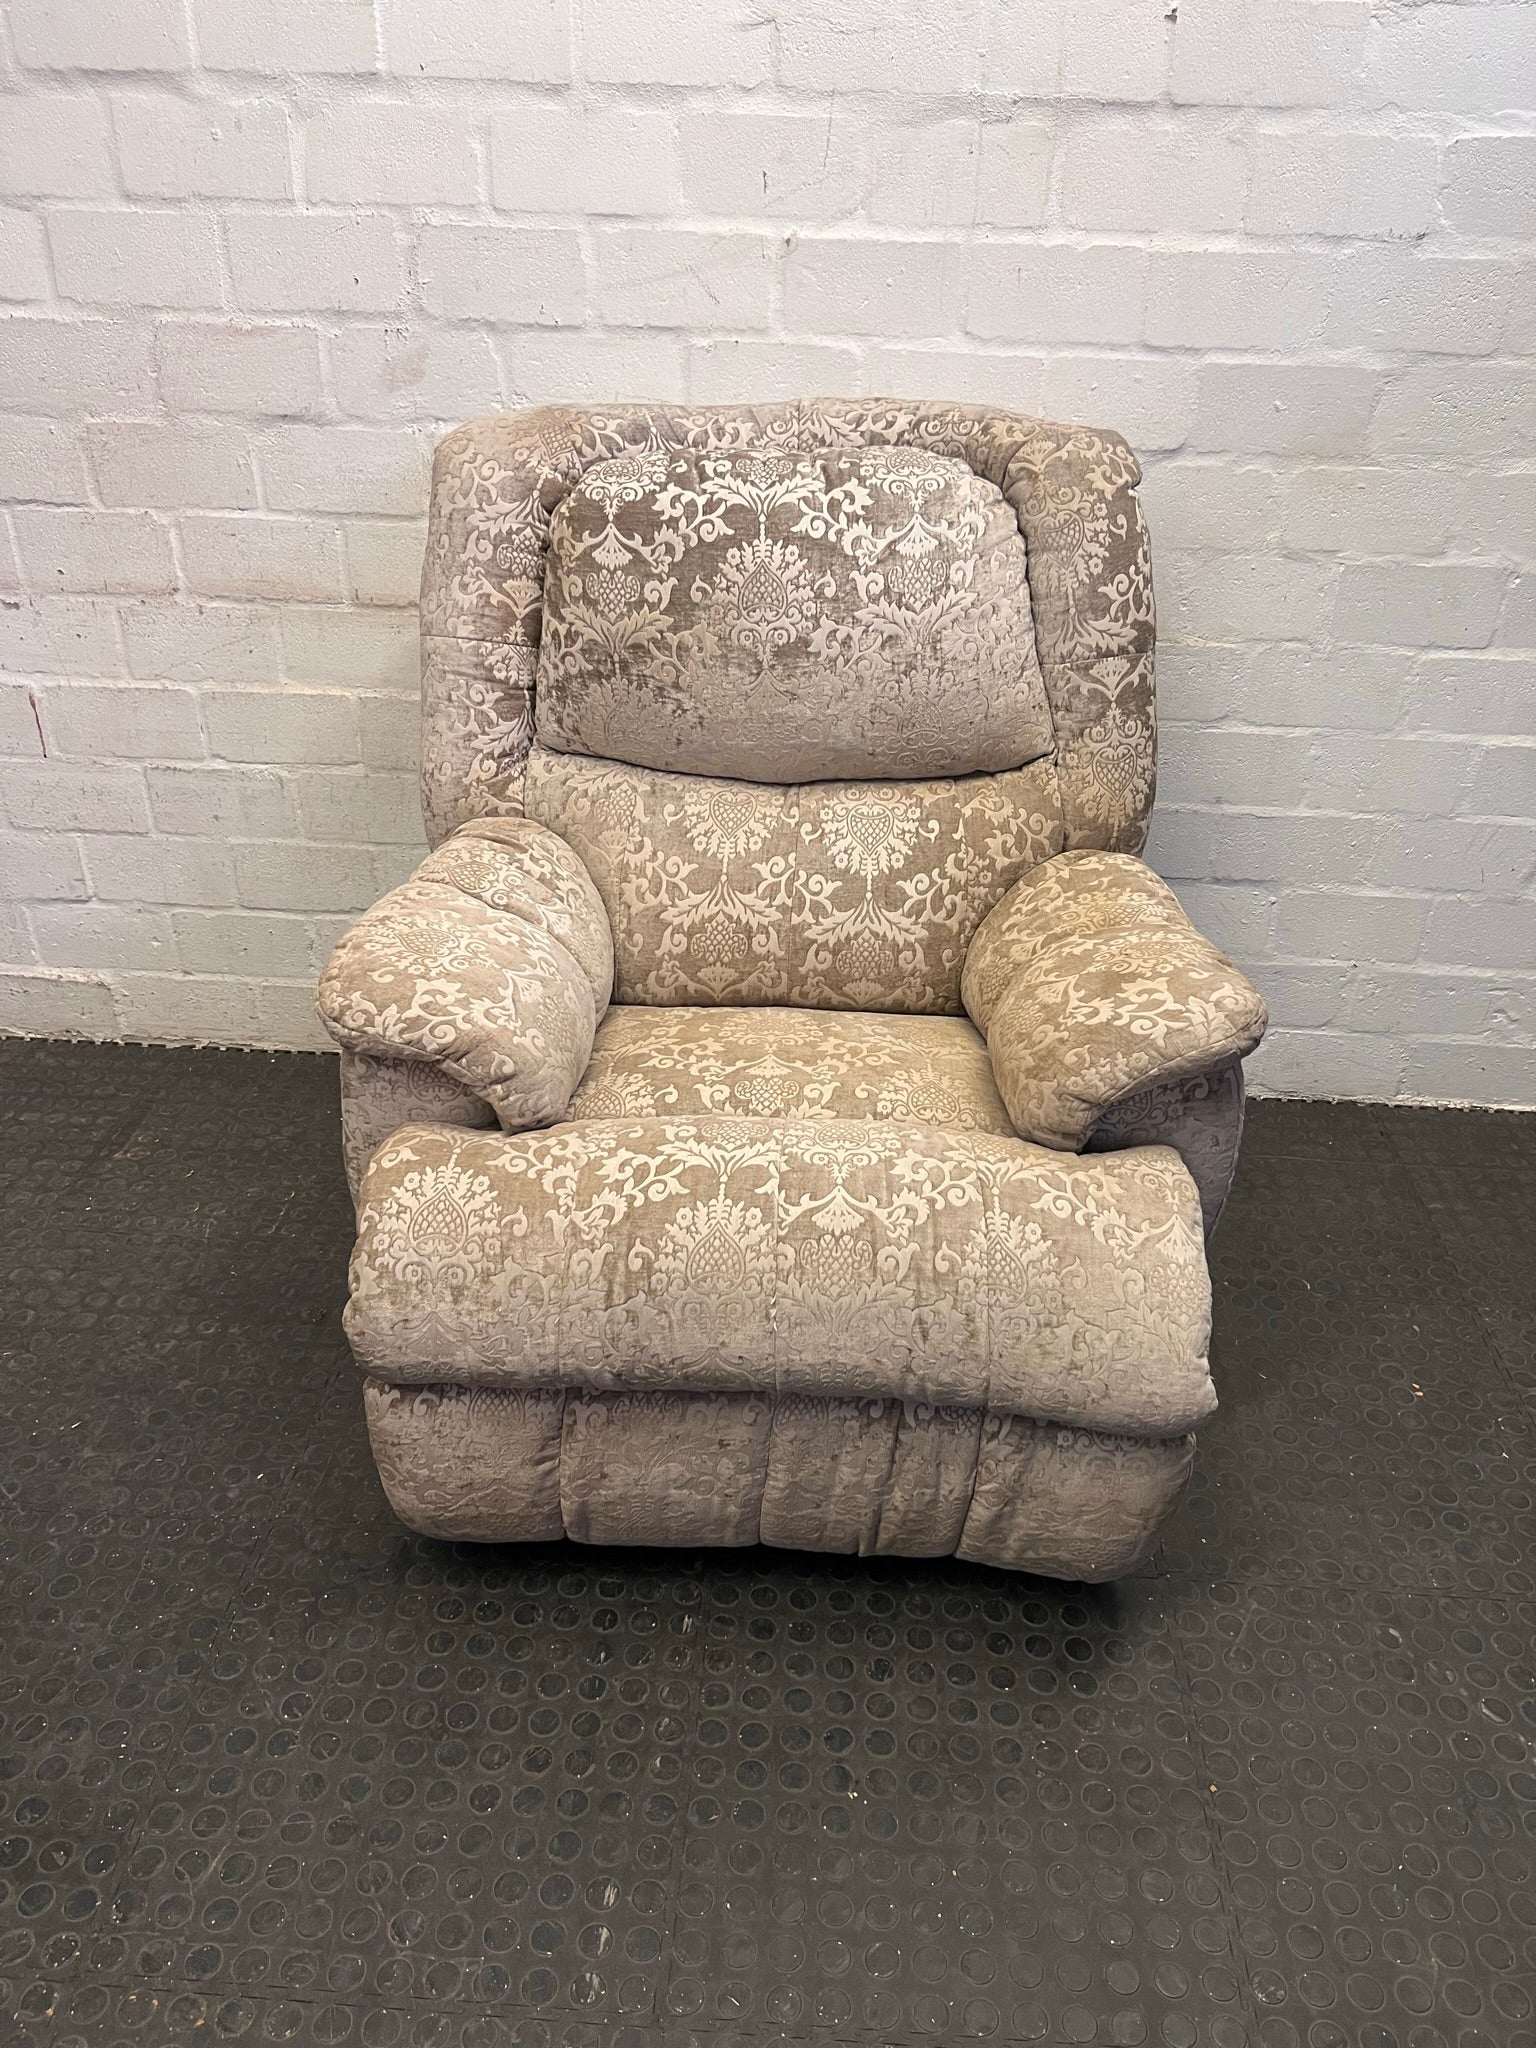 Beige and Cream Patterned Lazy Boy Recliner